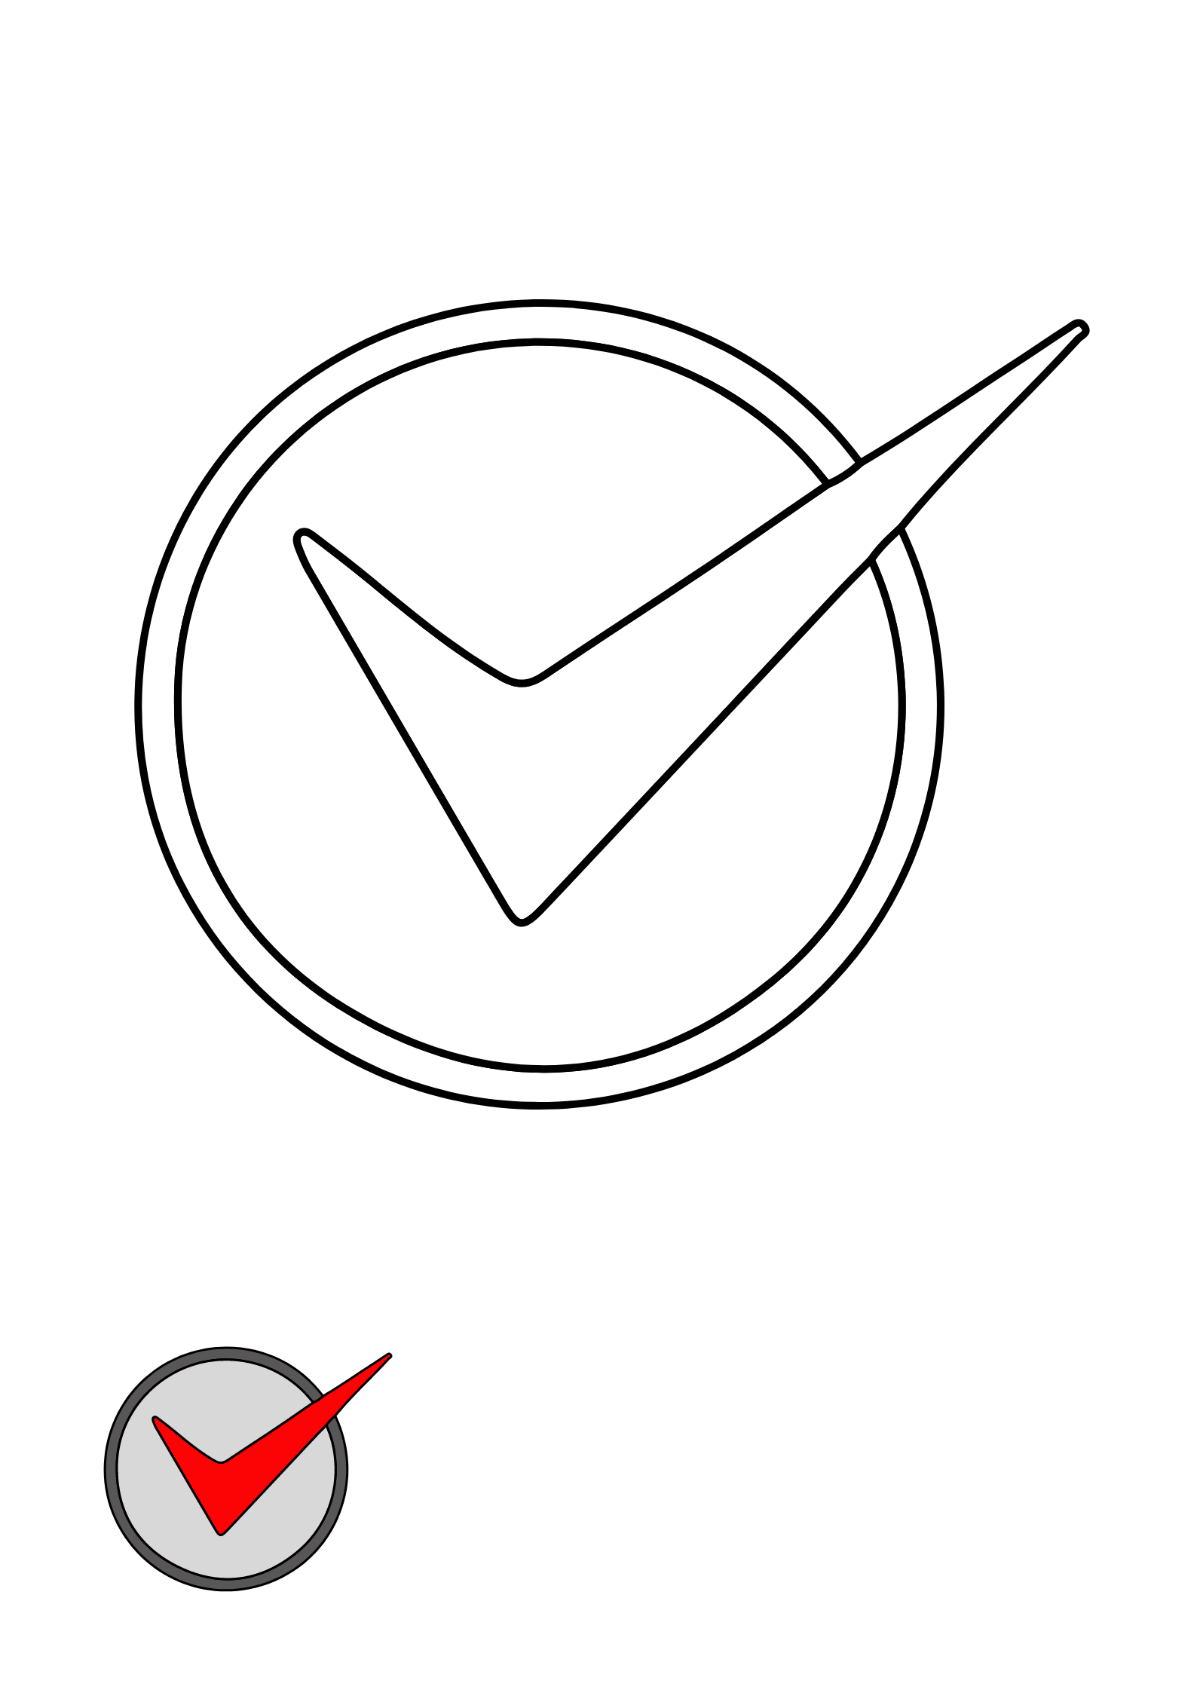 Free Vote Check Mark coloring page Template